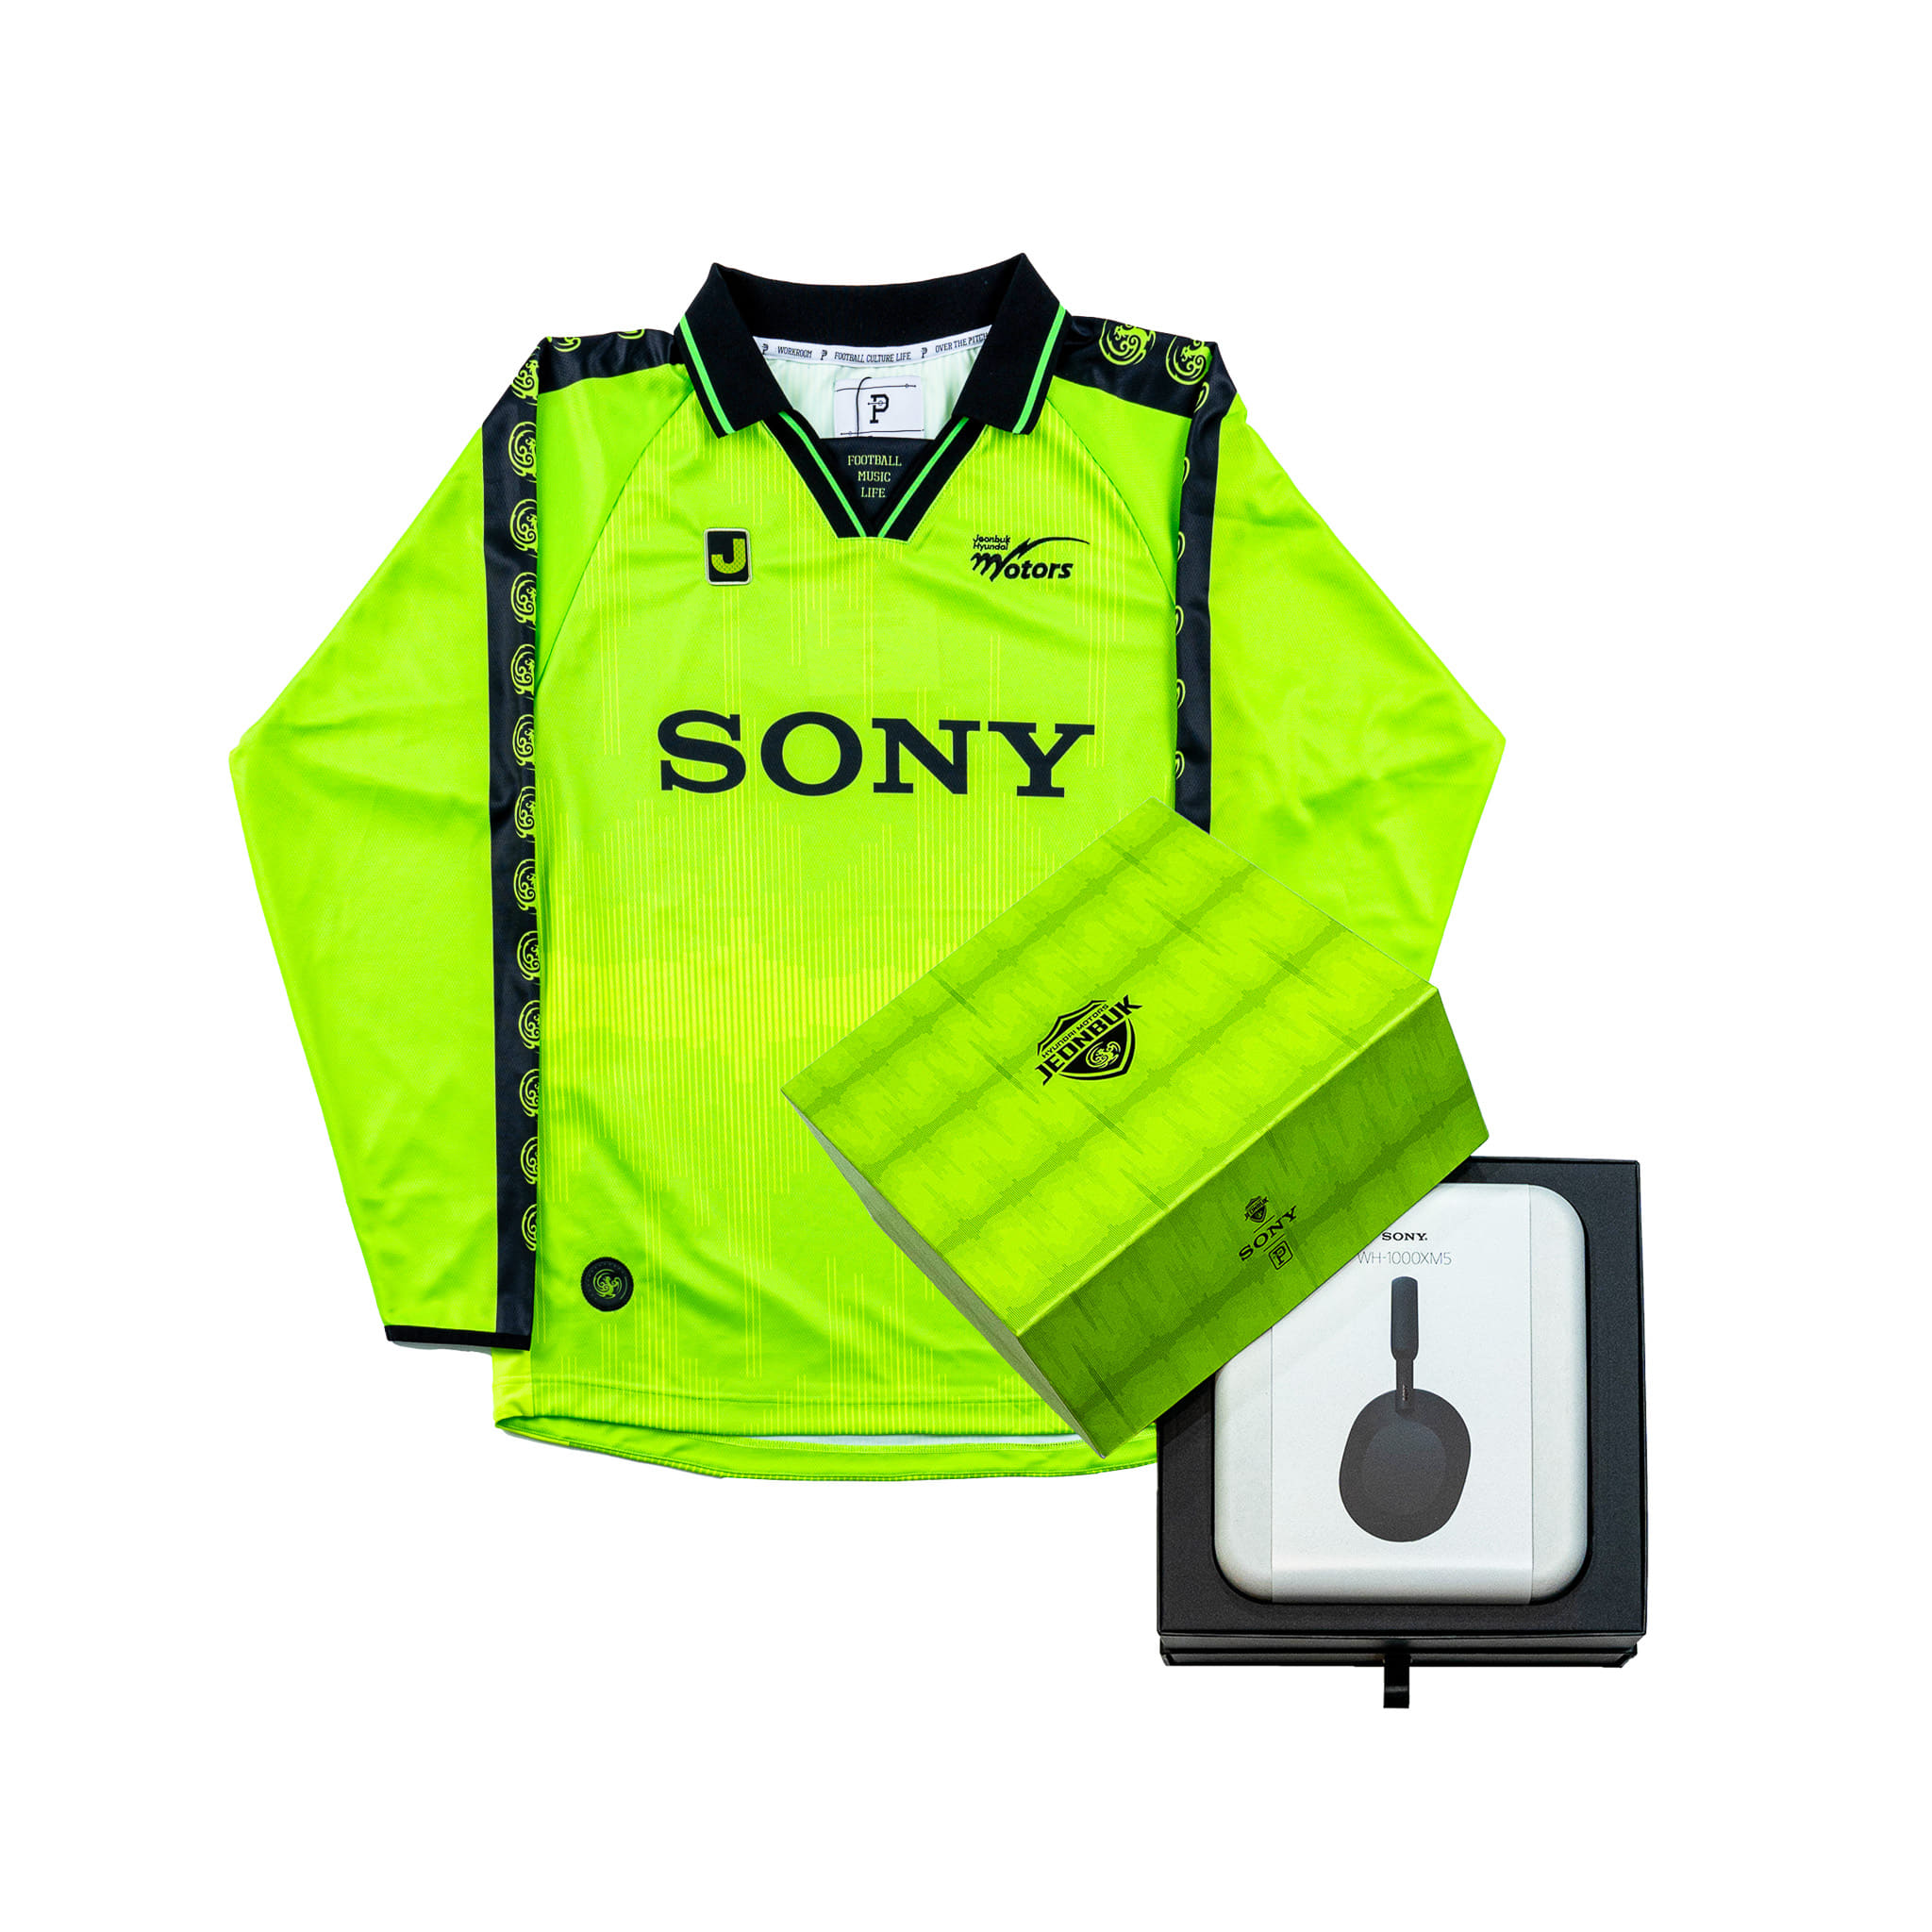 P X SONY for JBFC JERSEY + WH-1000XM5